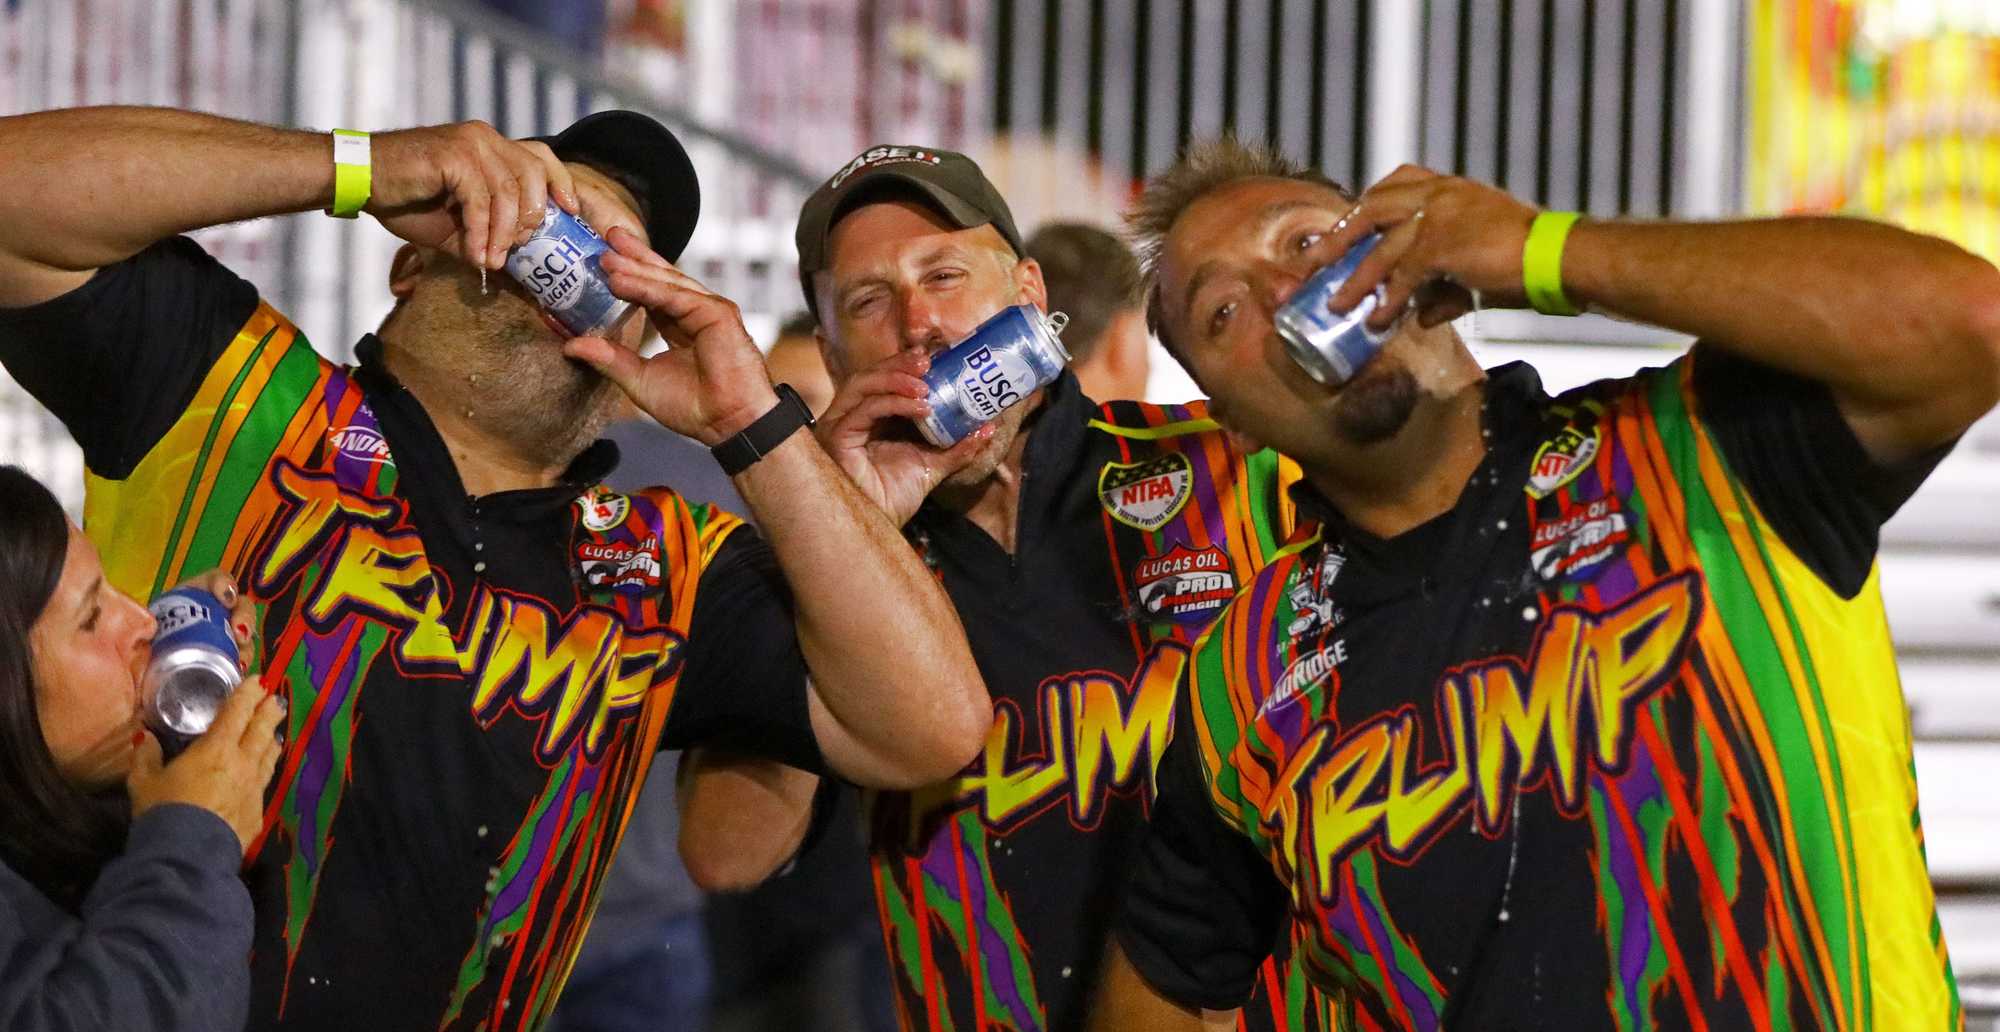 Shane Kellogg (right) of Forest, Ohio, and his team shotgunned beer after his win at The Sandwich Fair in Illinois. 
